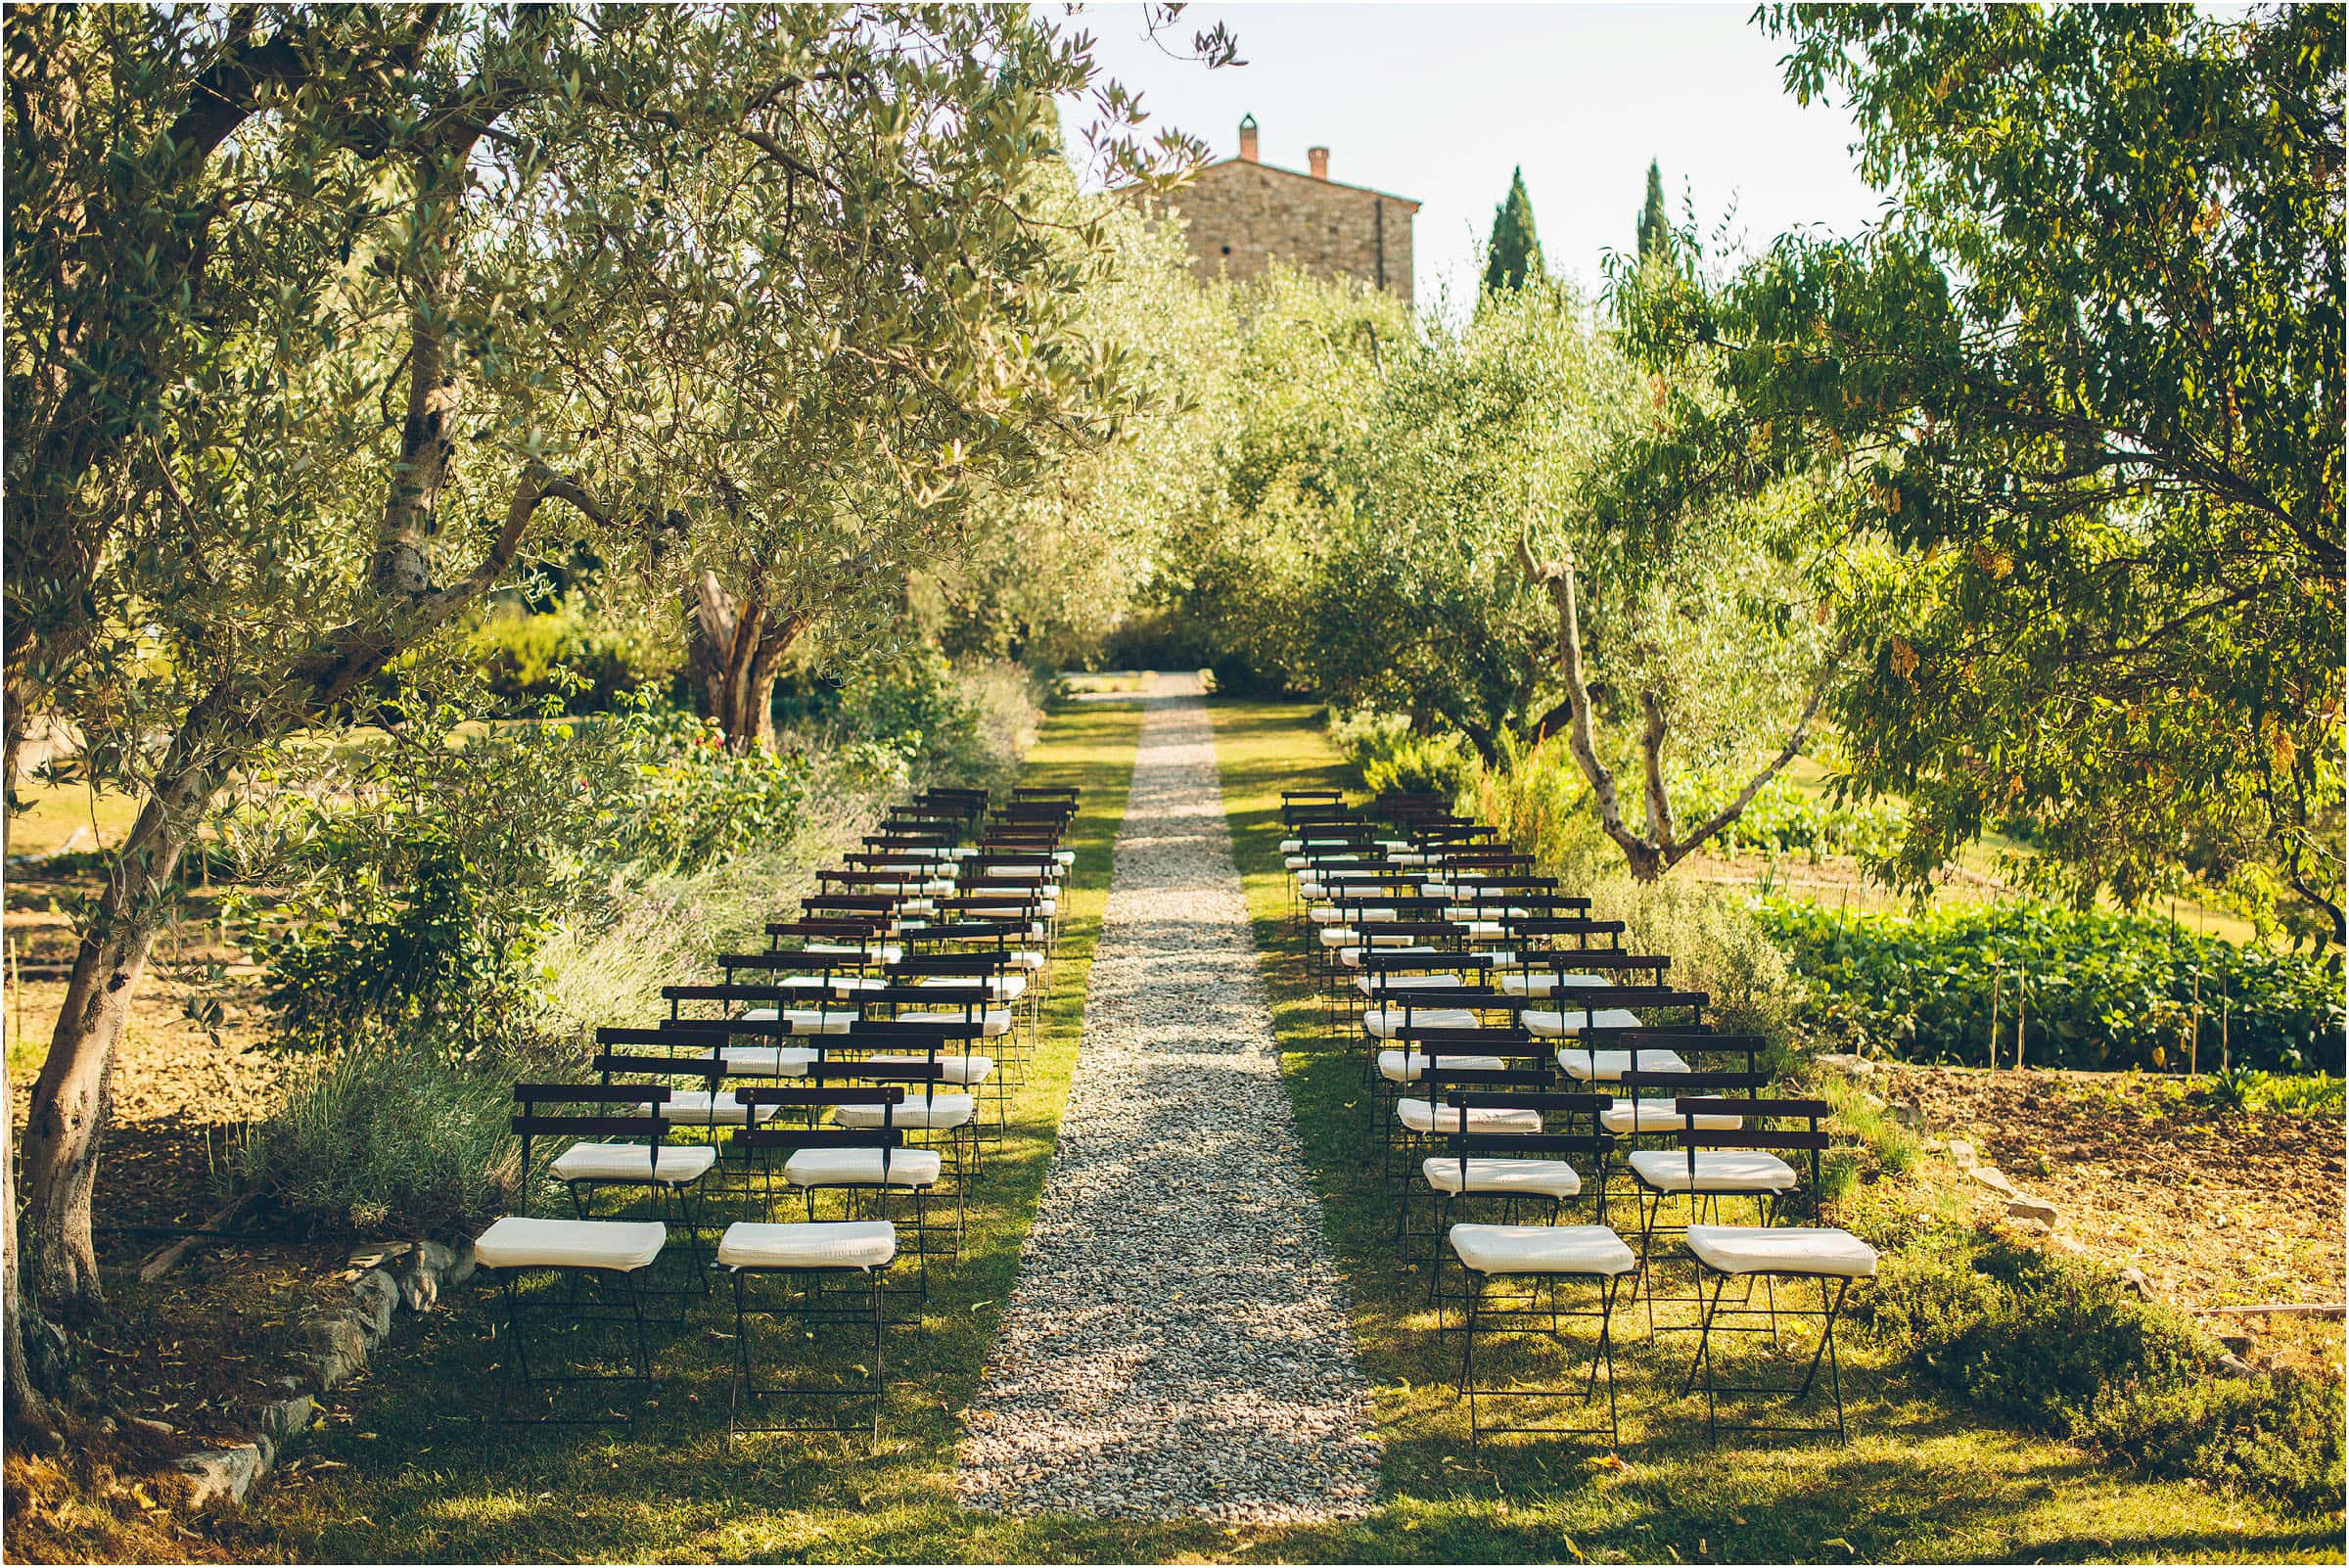 Contemporary and cool the aisle at Castello di Vicarello in Tuscany with empty seat waiting for guests to arrive